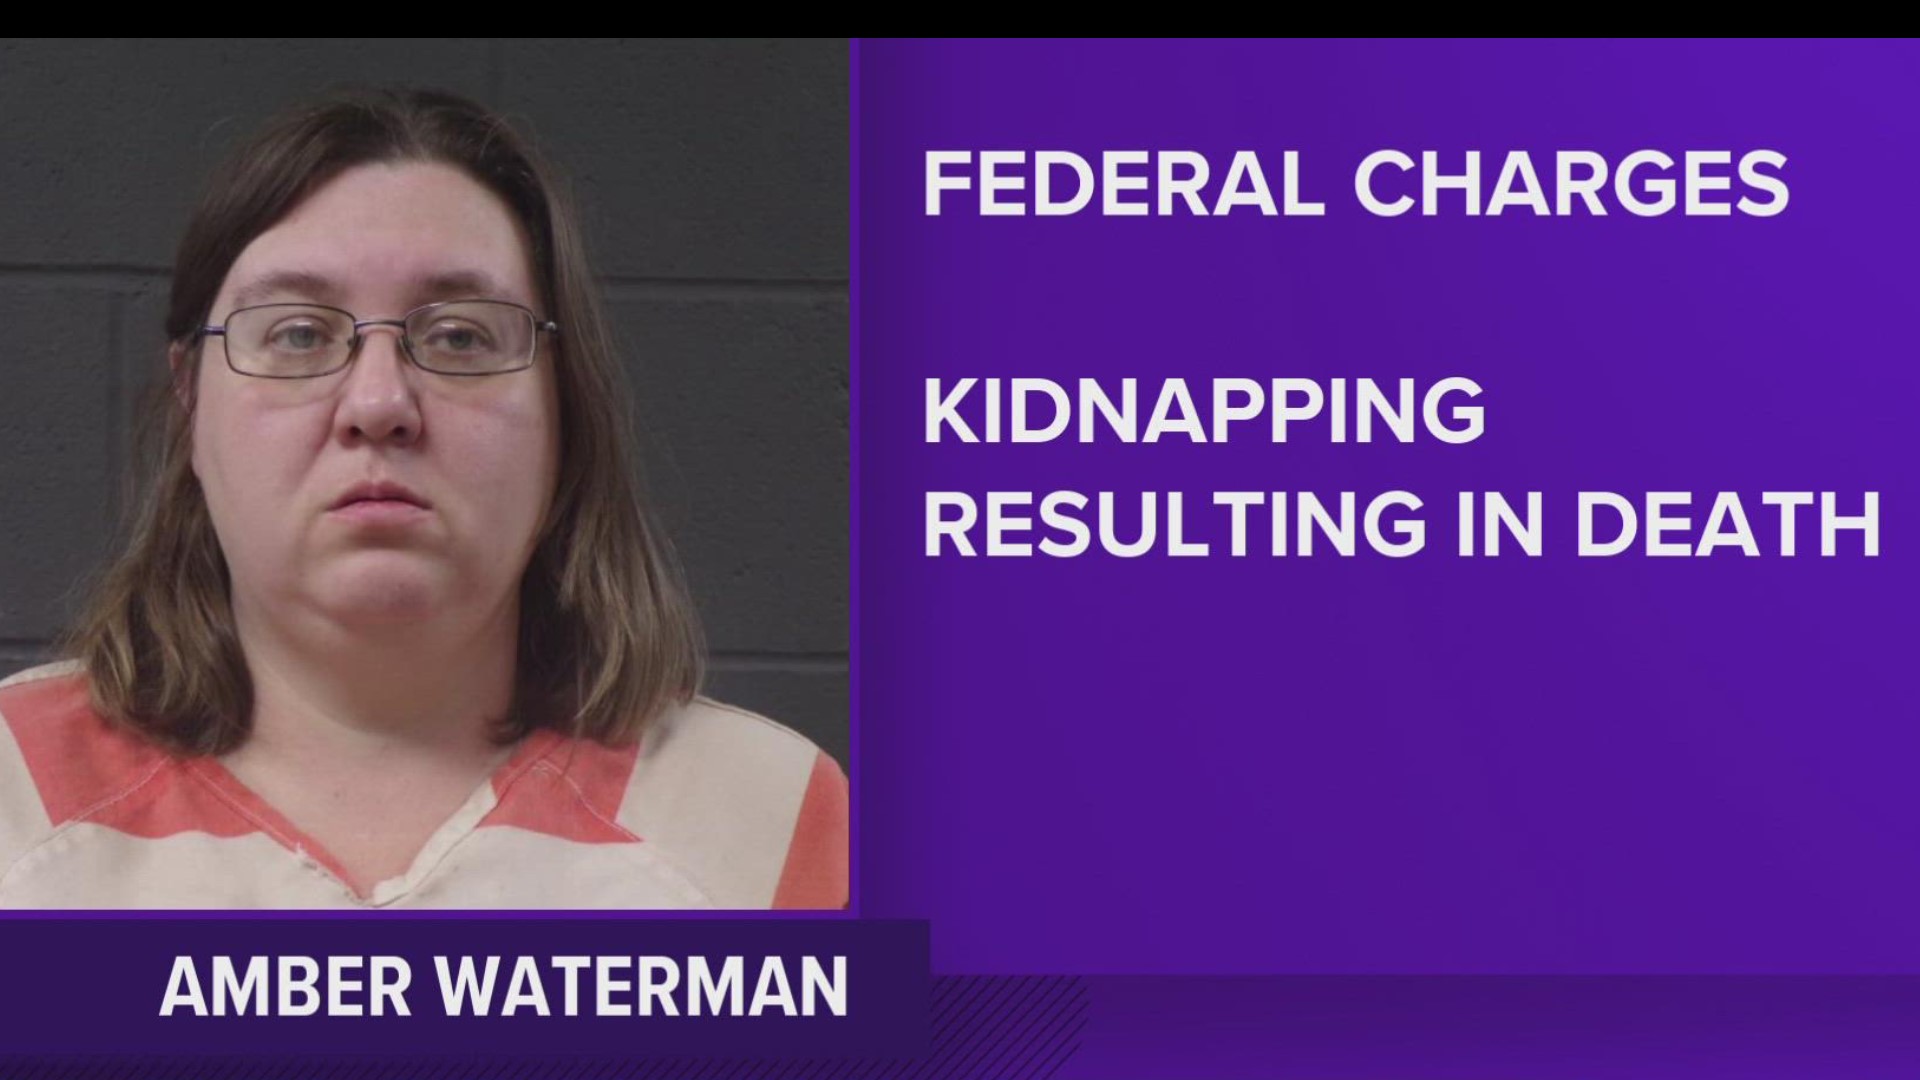 Amber Waterman was in federal court today in Springfield following the murder of Ashley Bush and her baby.